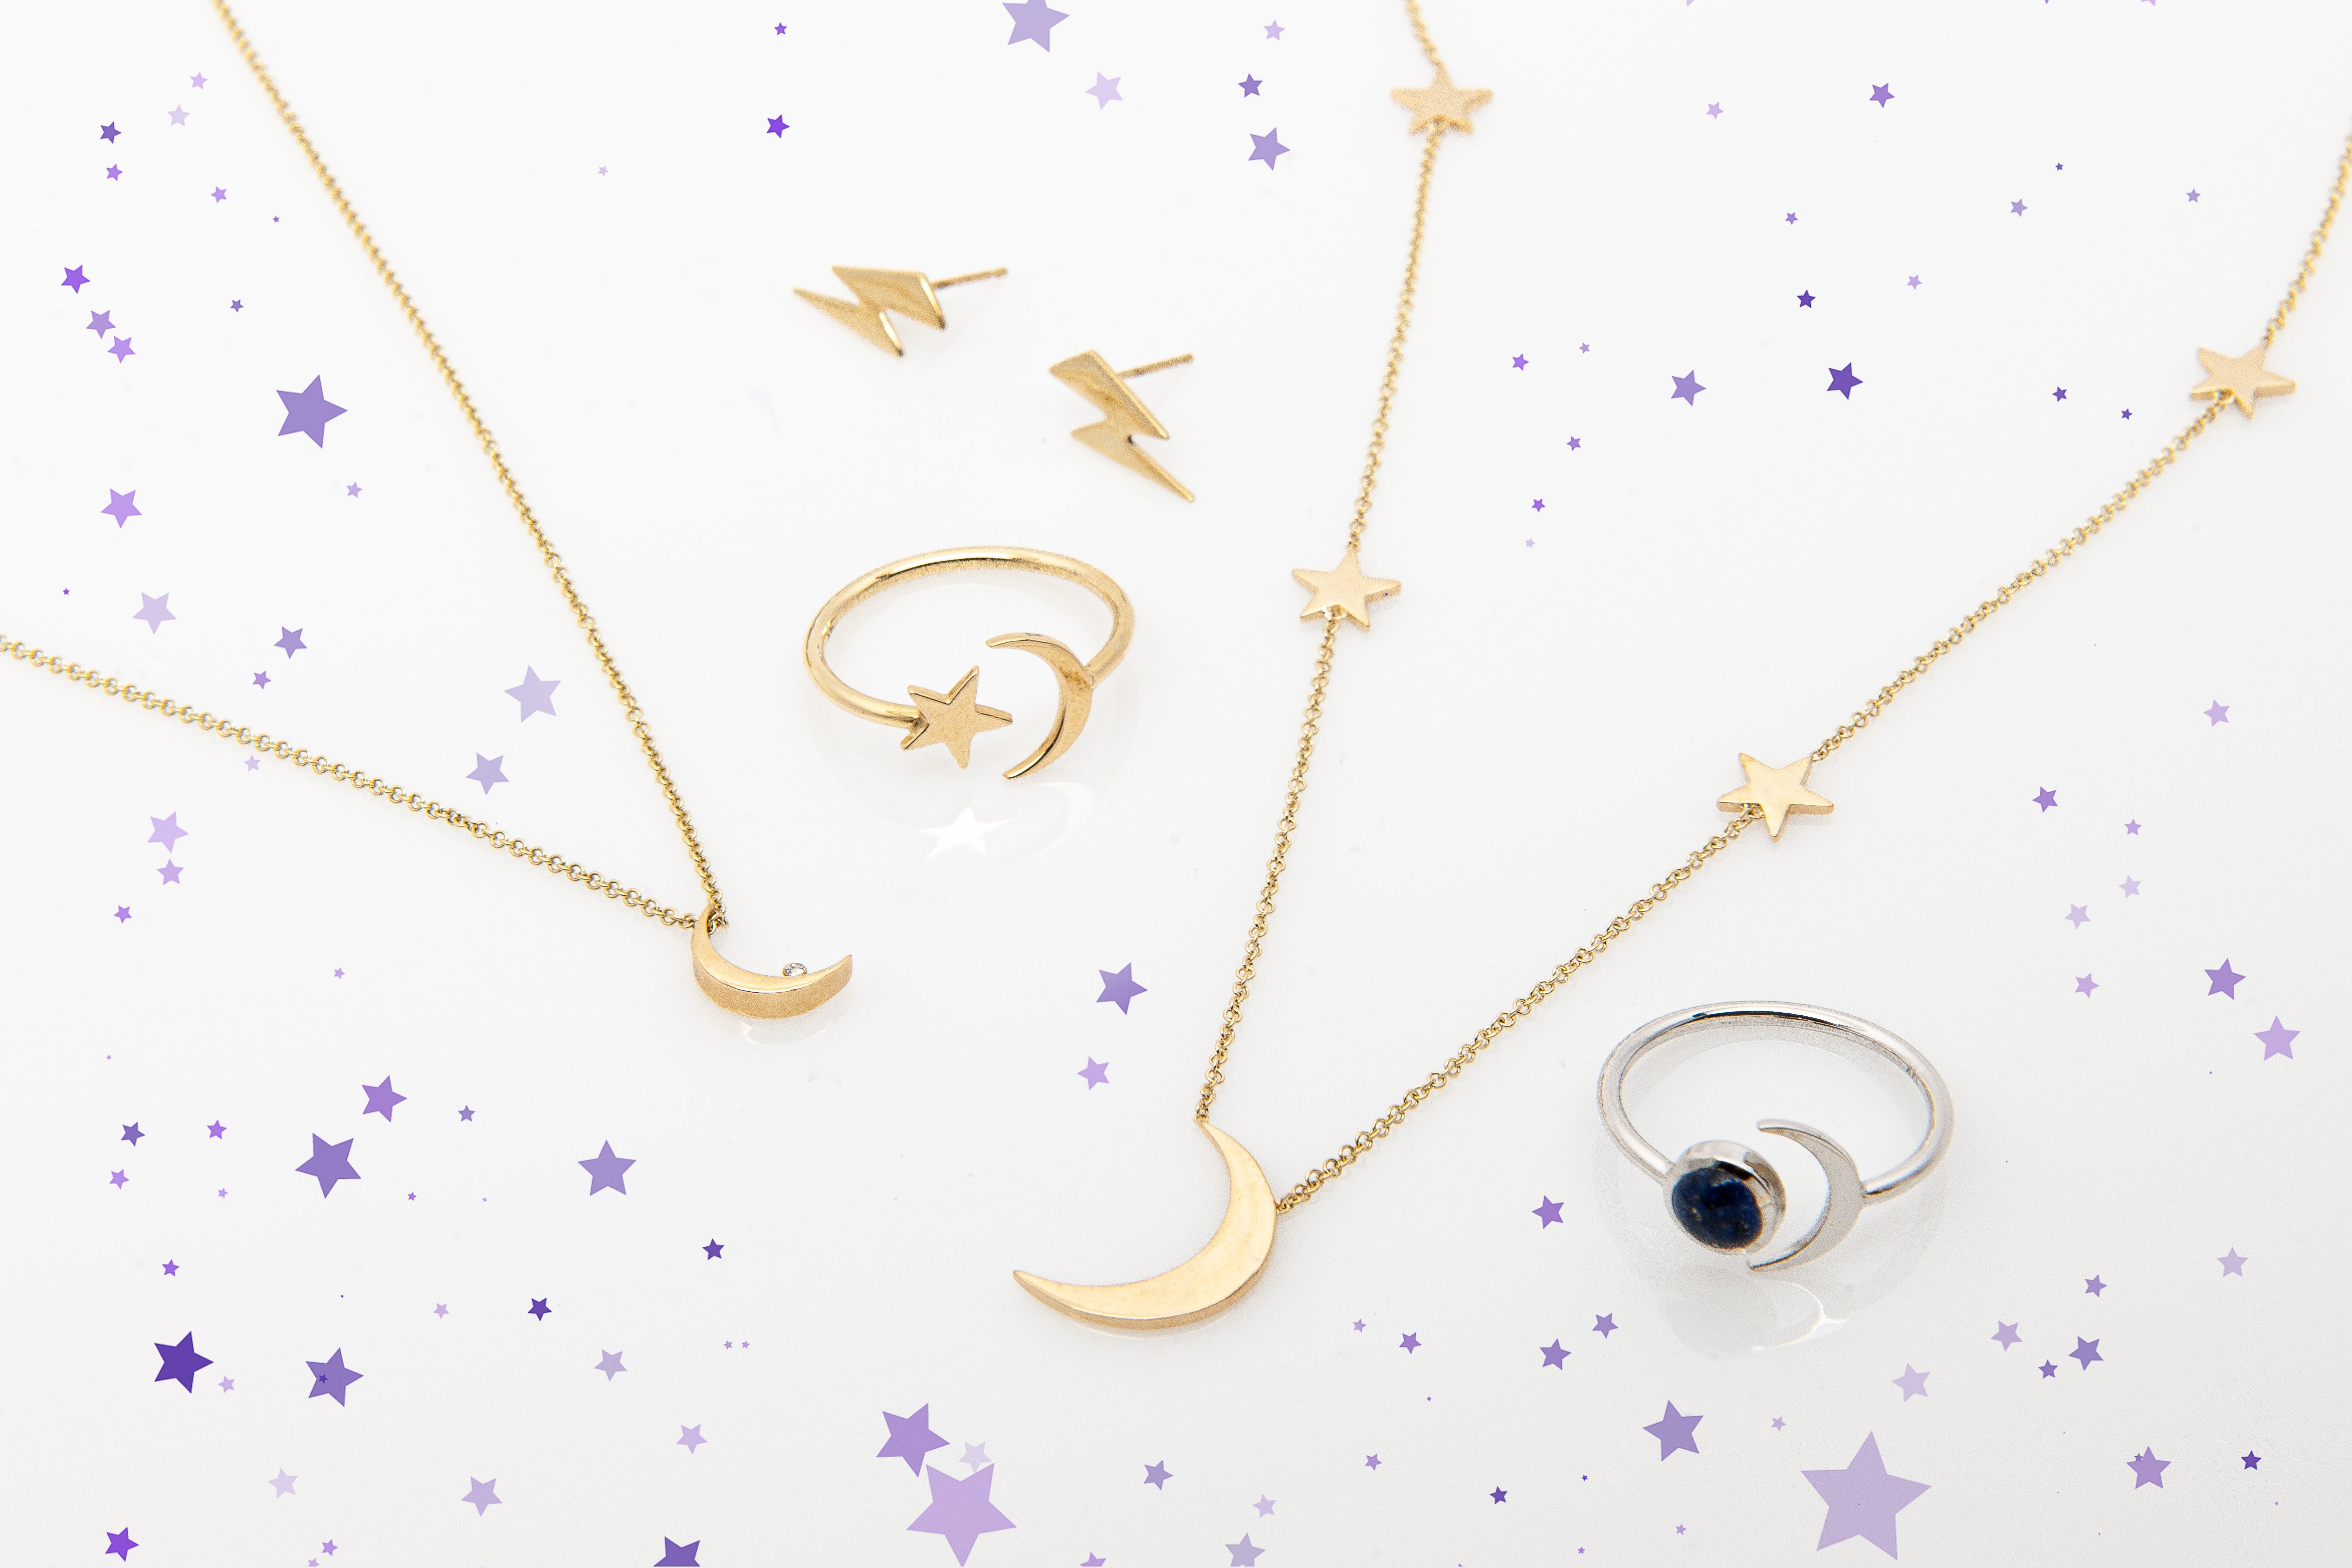 A preview of Starflower Jewelry’s celestial collection.